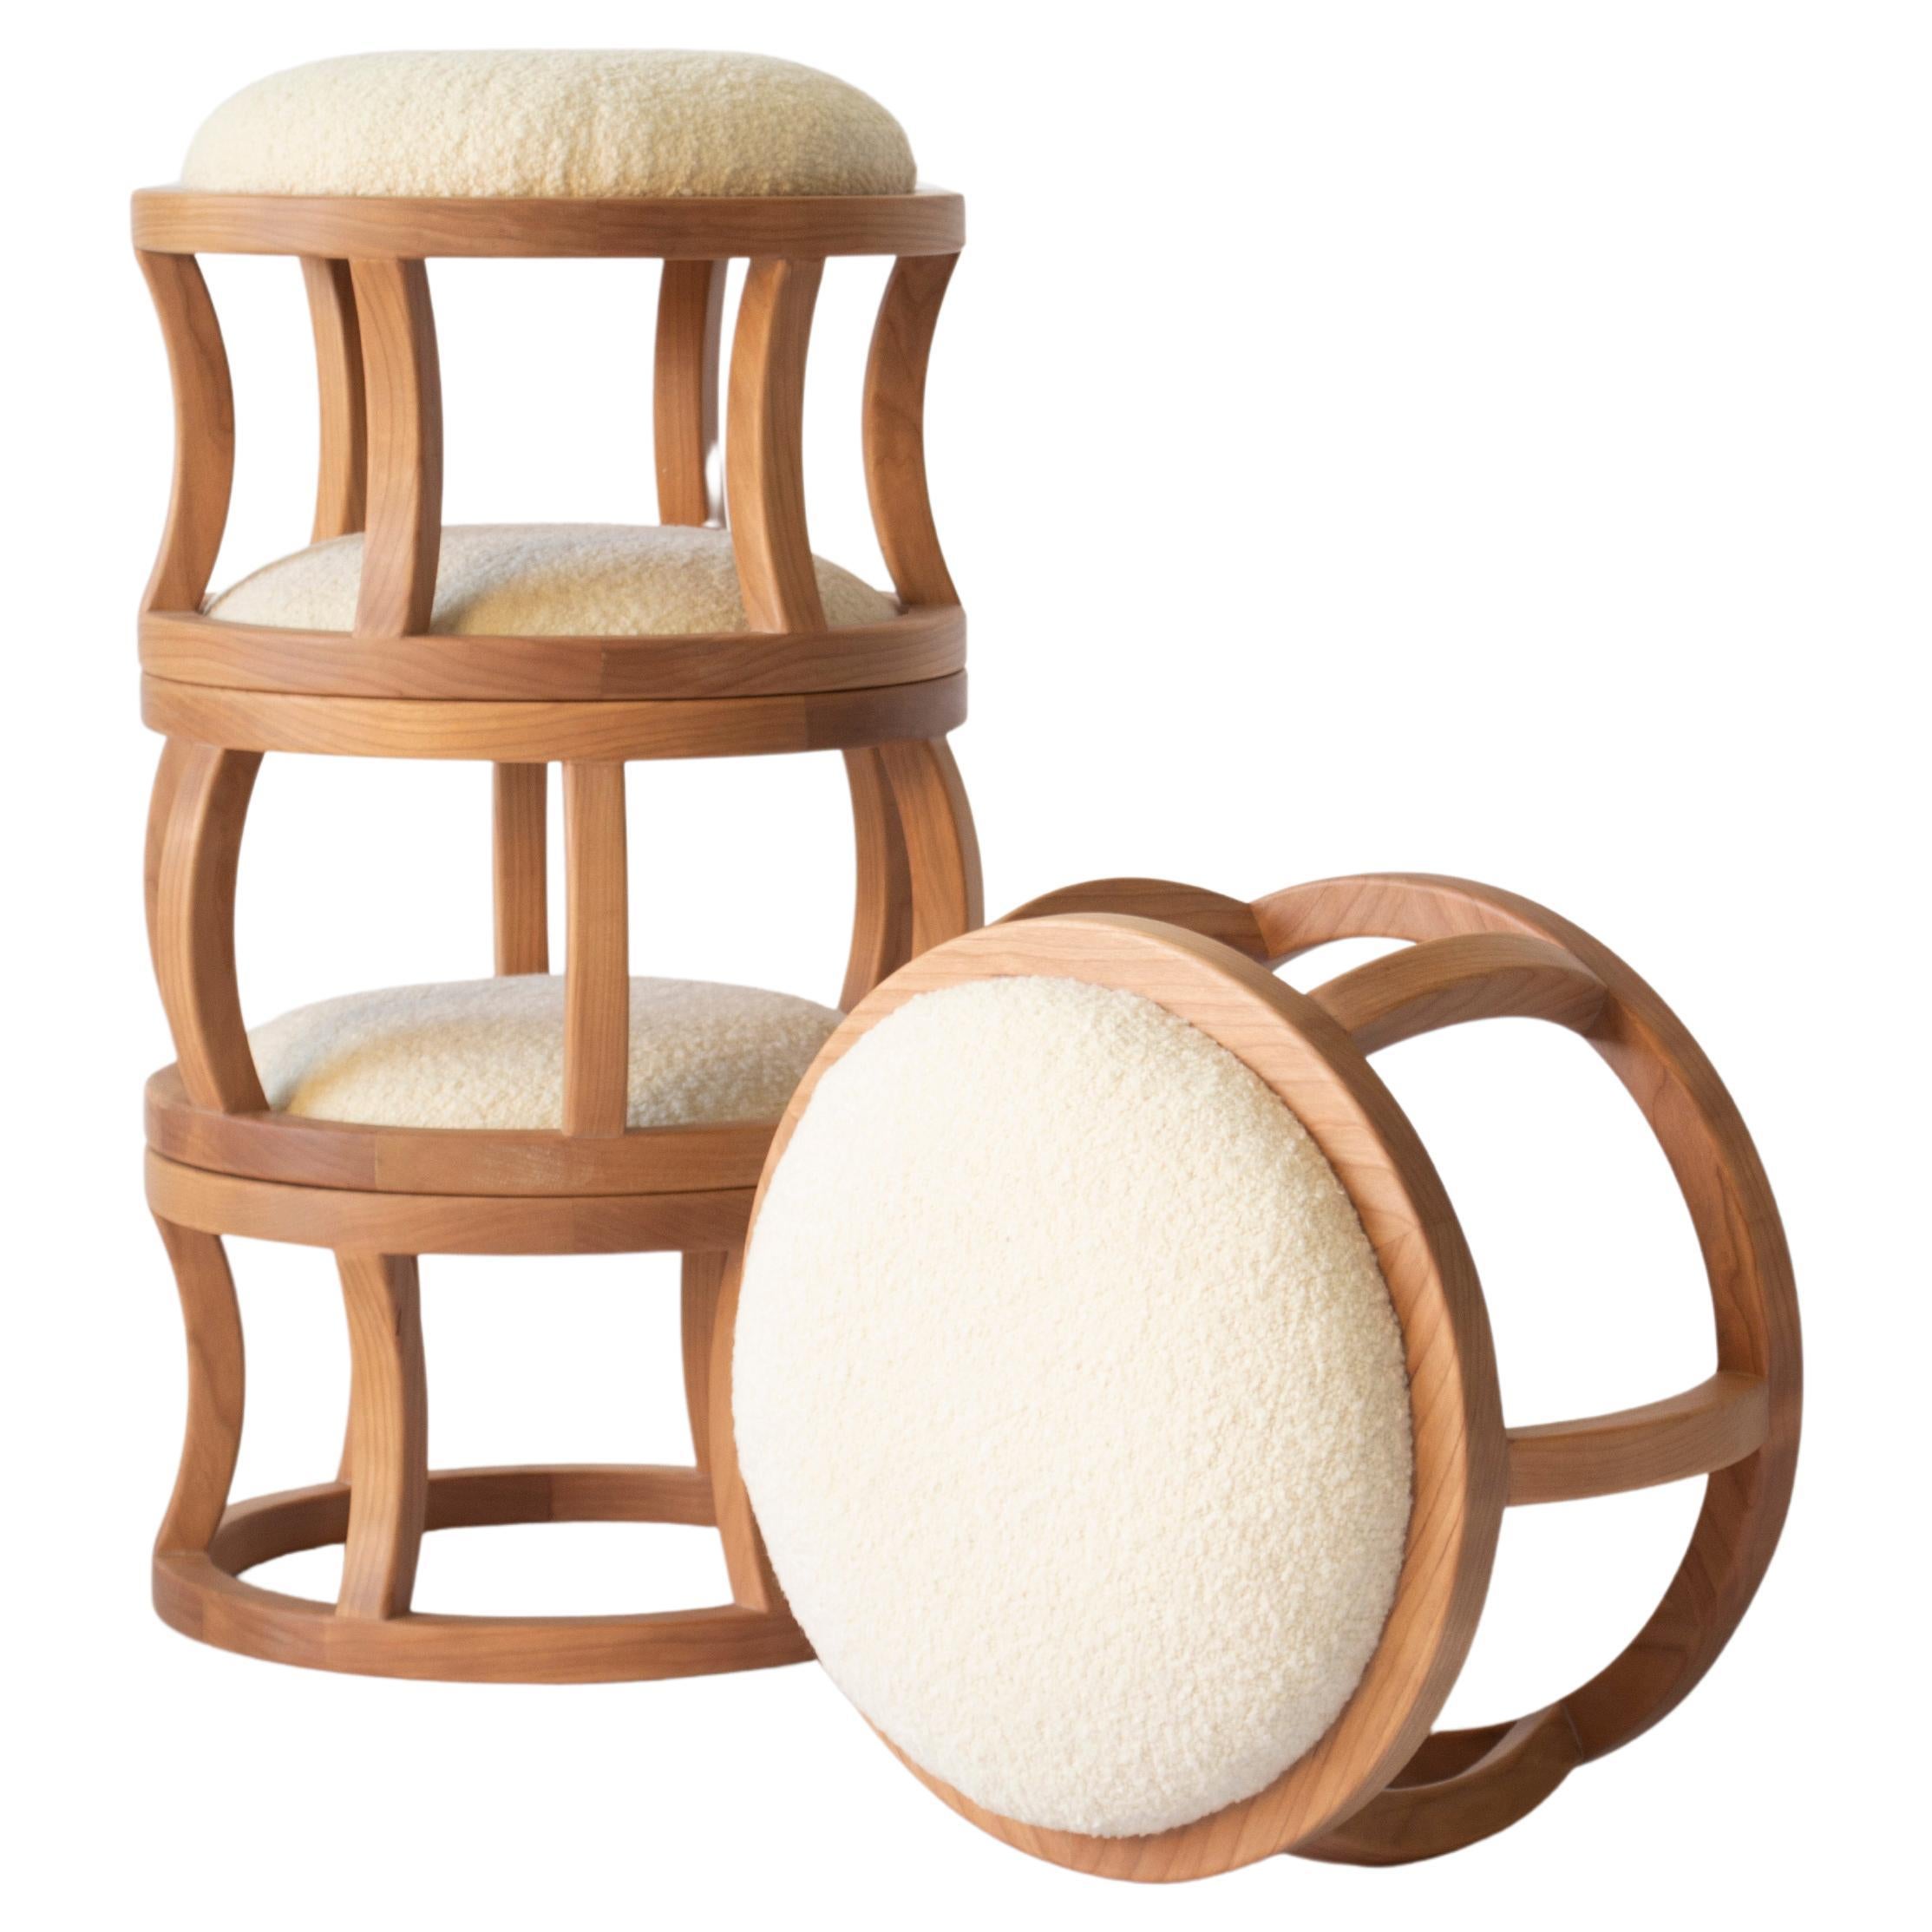 The Violette low stacking stools are the perfect compliment to any living room. With a seat height at 10 inches, they are designed with a low coffee table height in mind, and form a beautiful sculptural tower when not in use. They can also be used